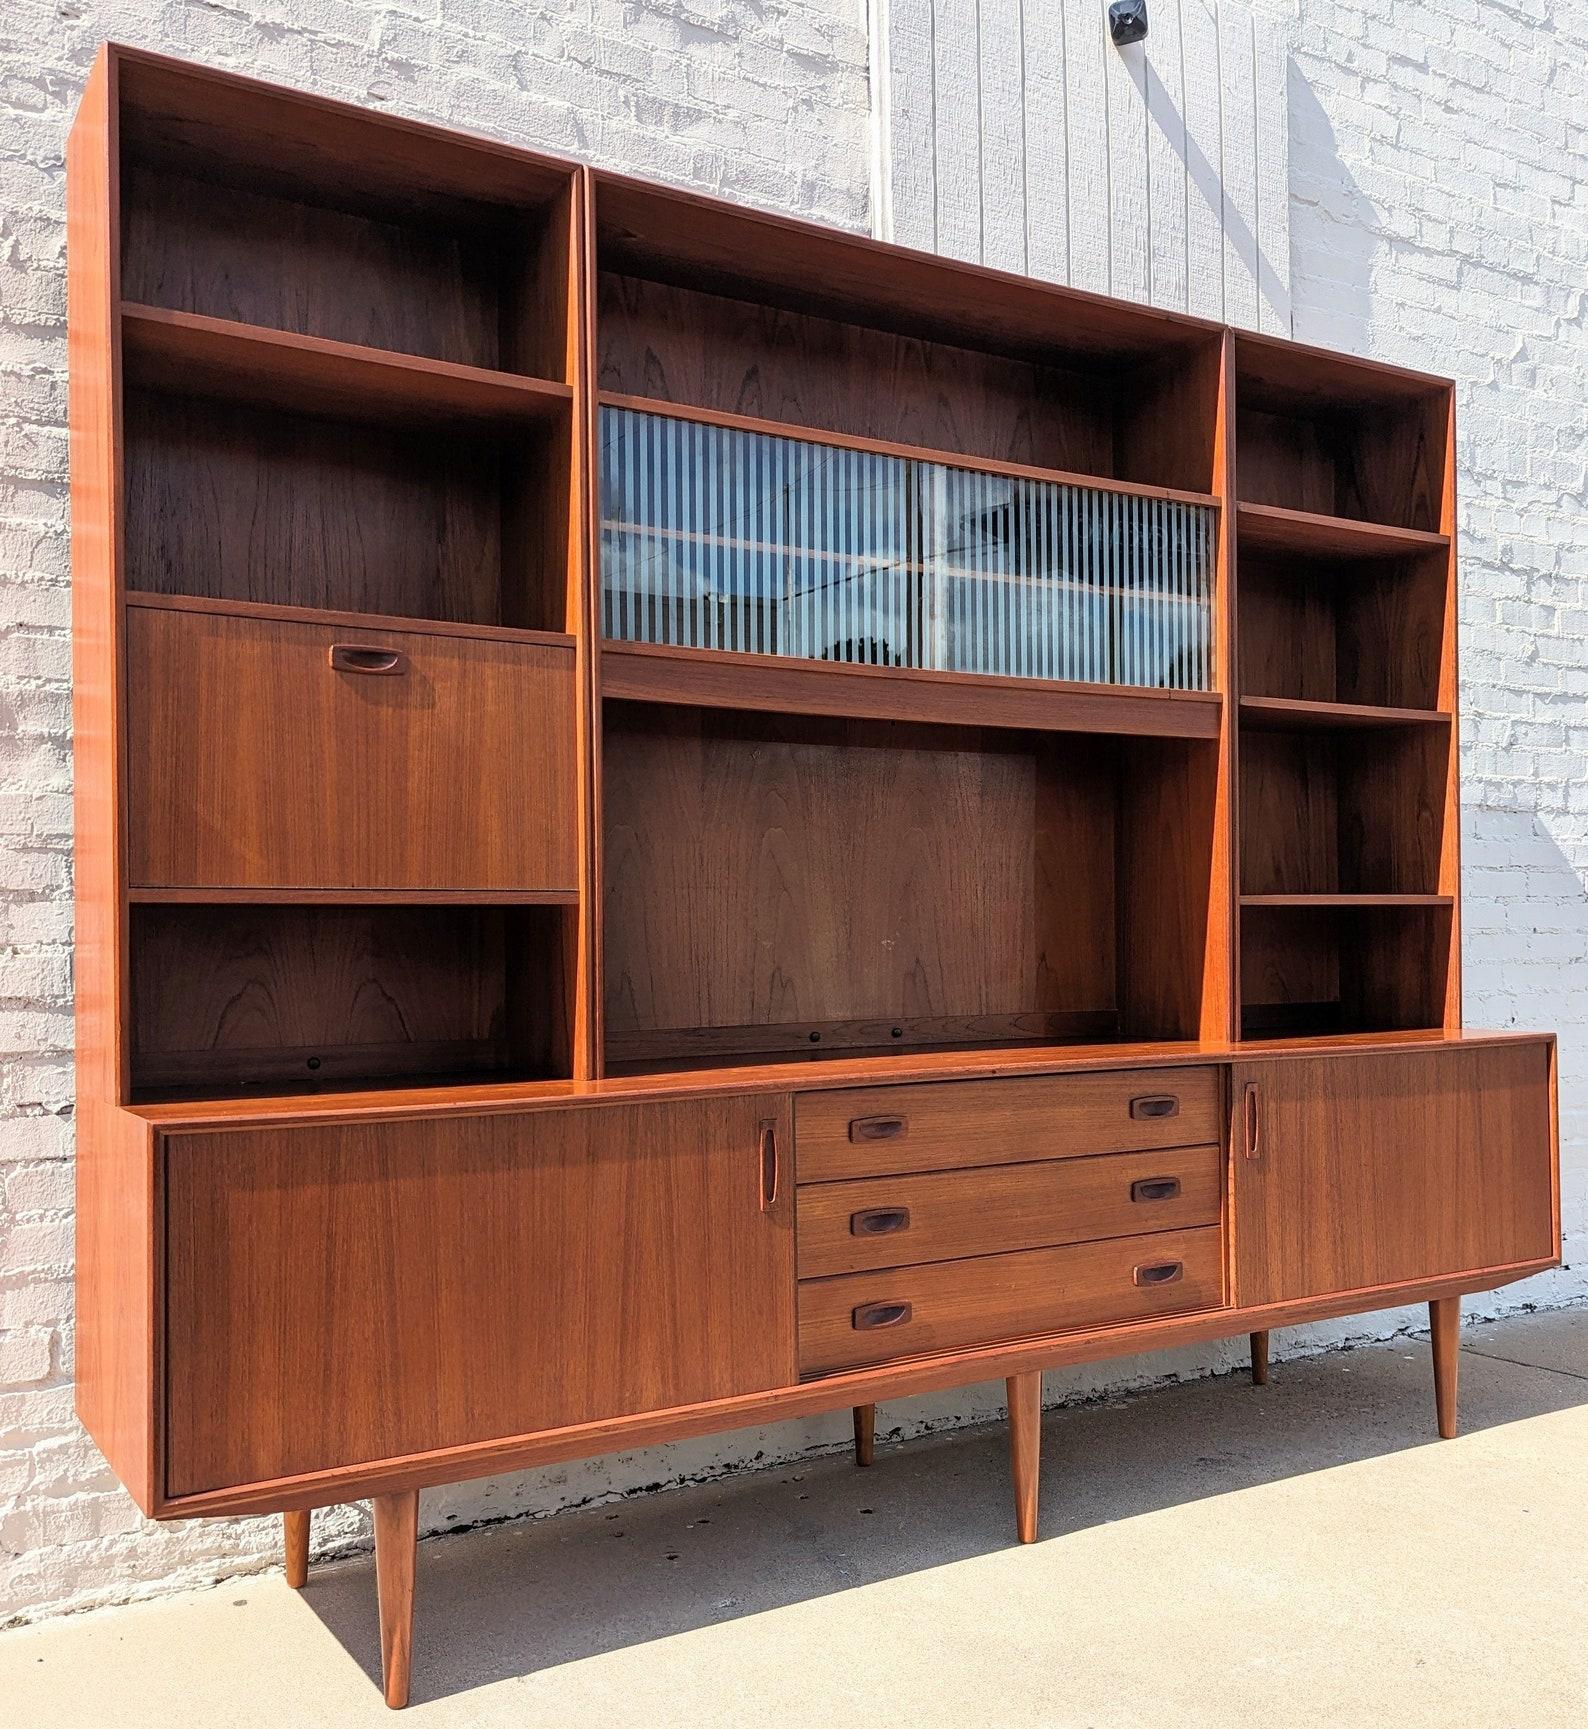 Mid Century Danish Modern Teak Bookcase Cabinet

Above average vintage condition and structurally sound. Stellar, unique piece. Has some expected slight finish wear and scratching. Has a couple small dings and discolorations on top. Glass has some